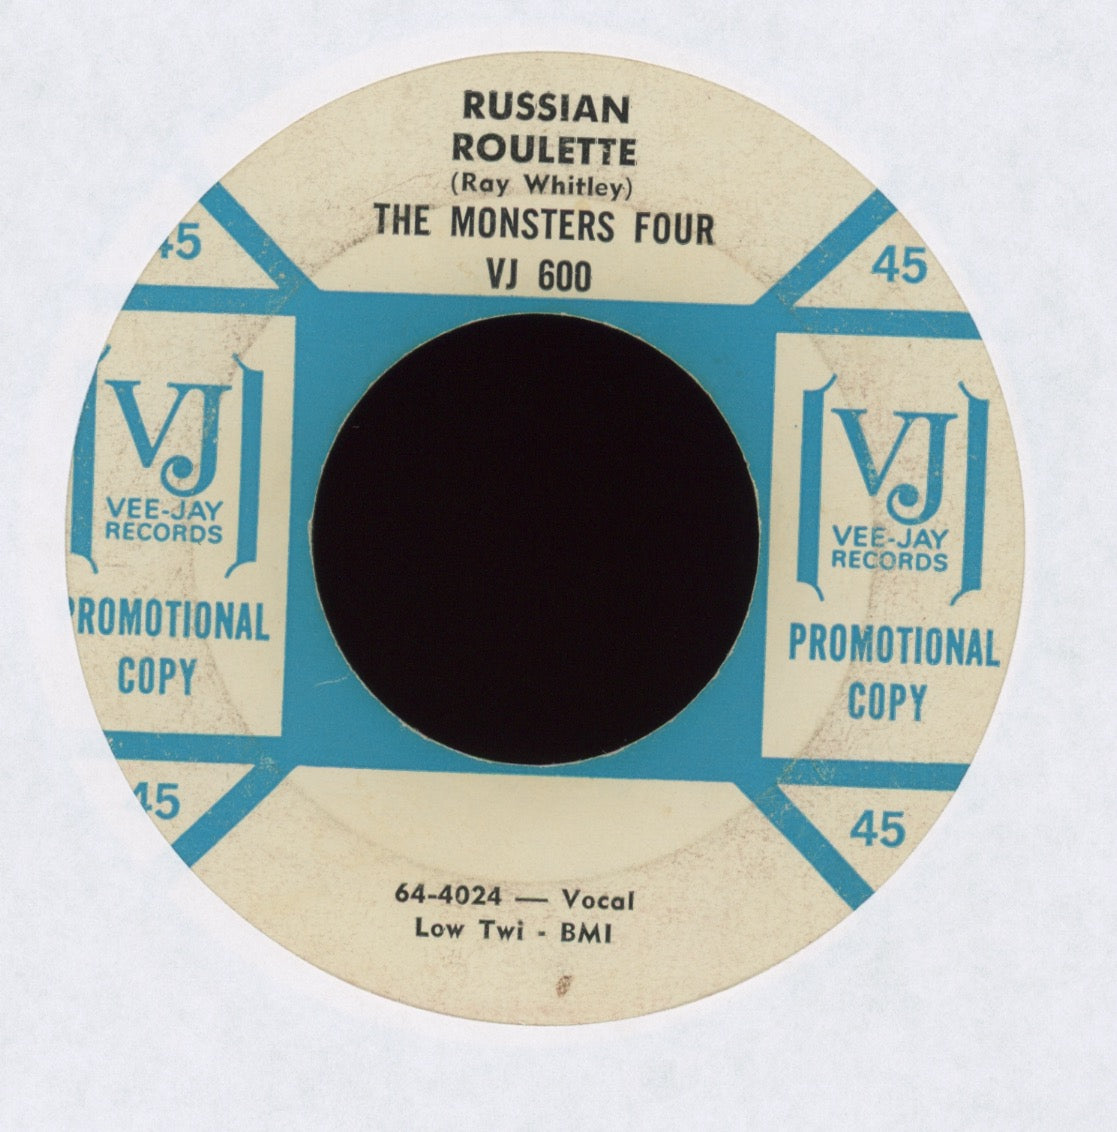 The Monsters Four - Russian Roulette on Vee Jay Promo